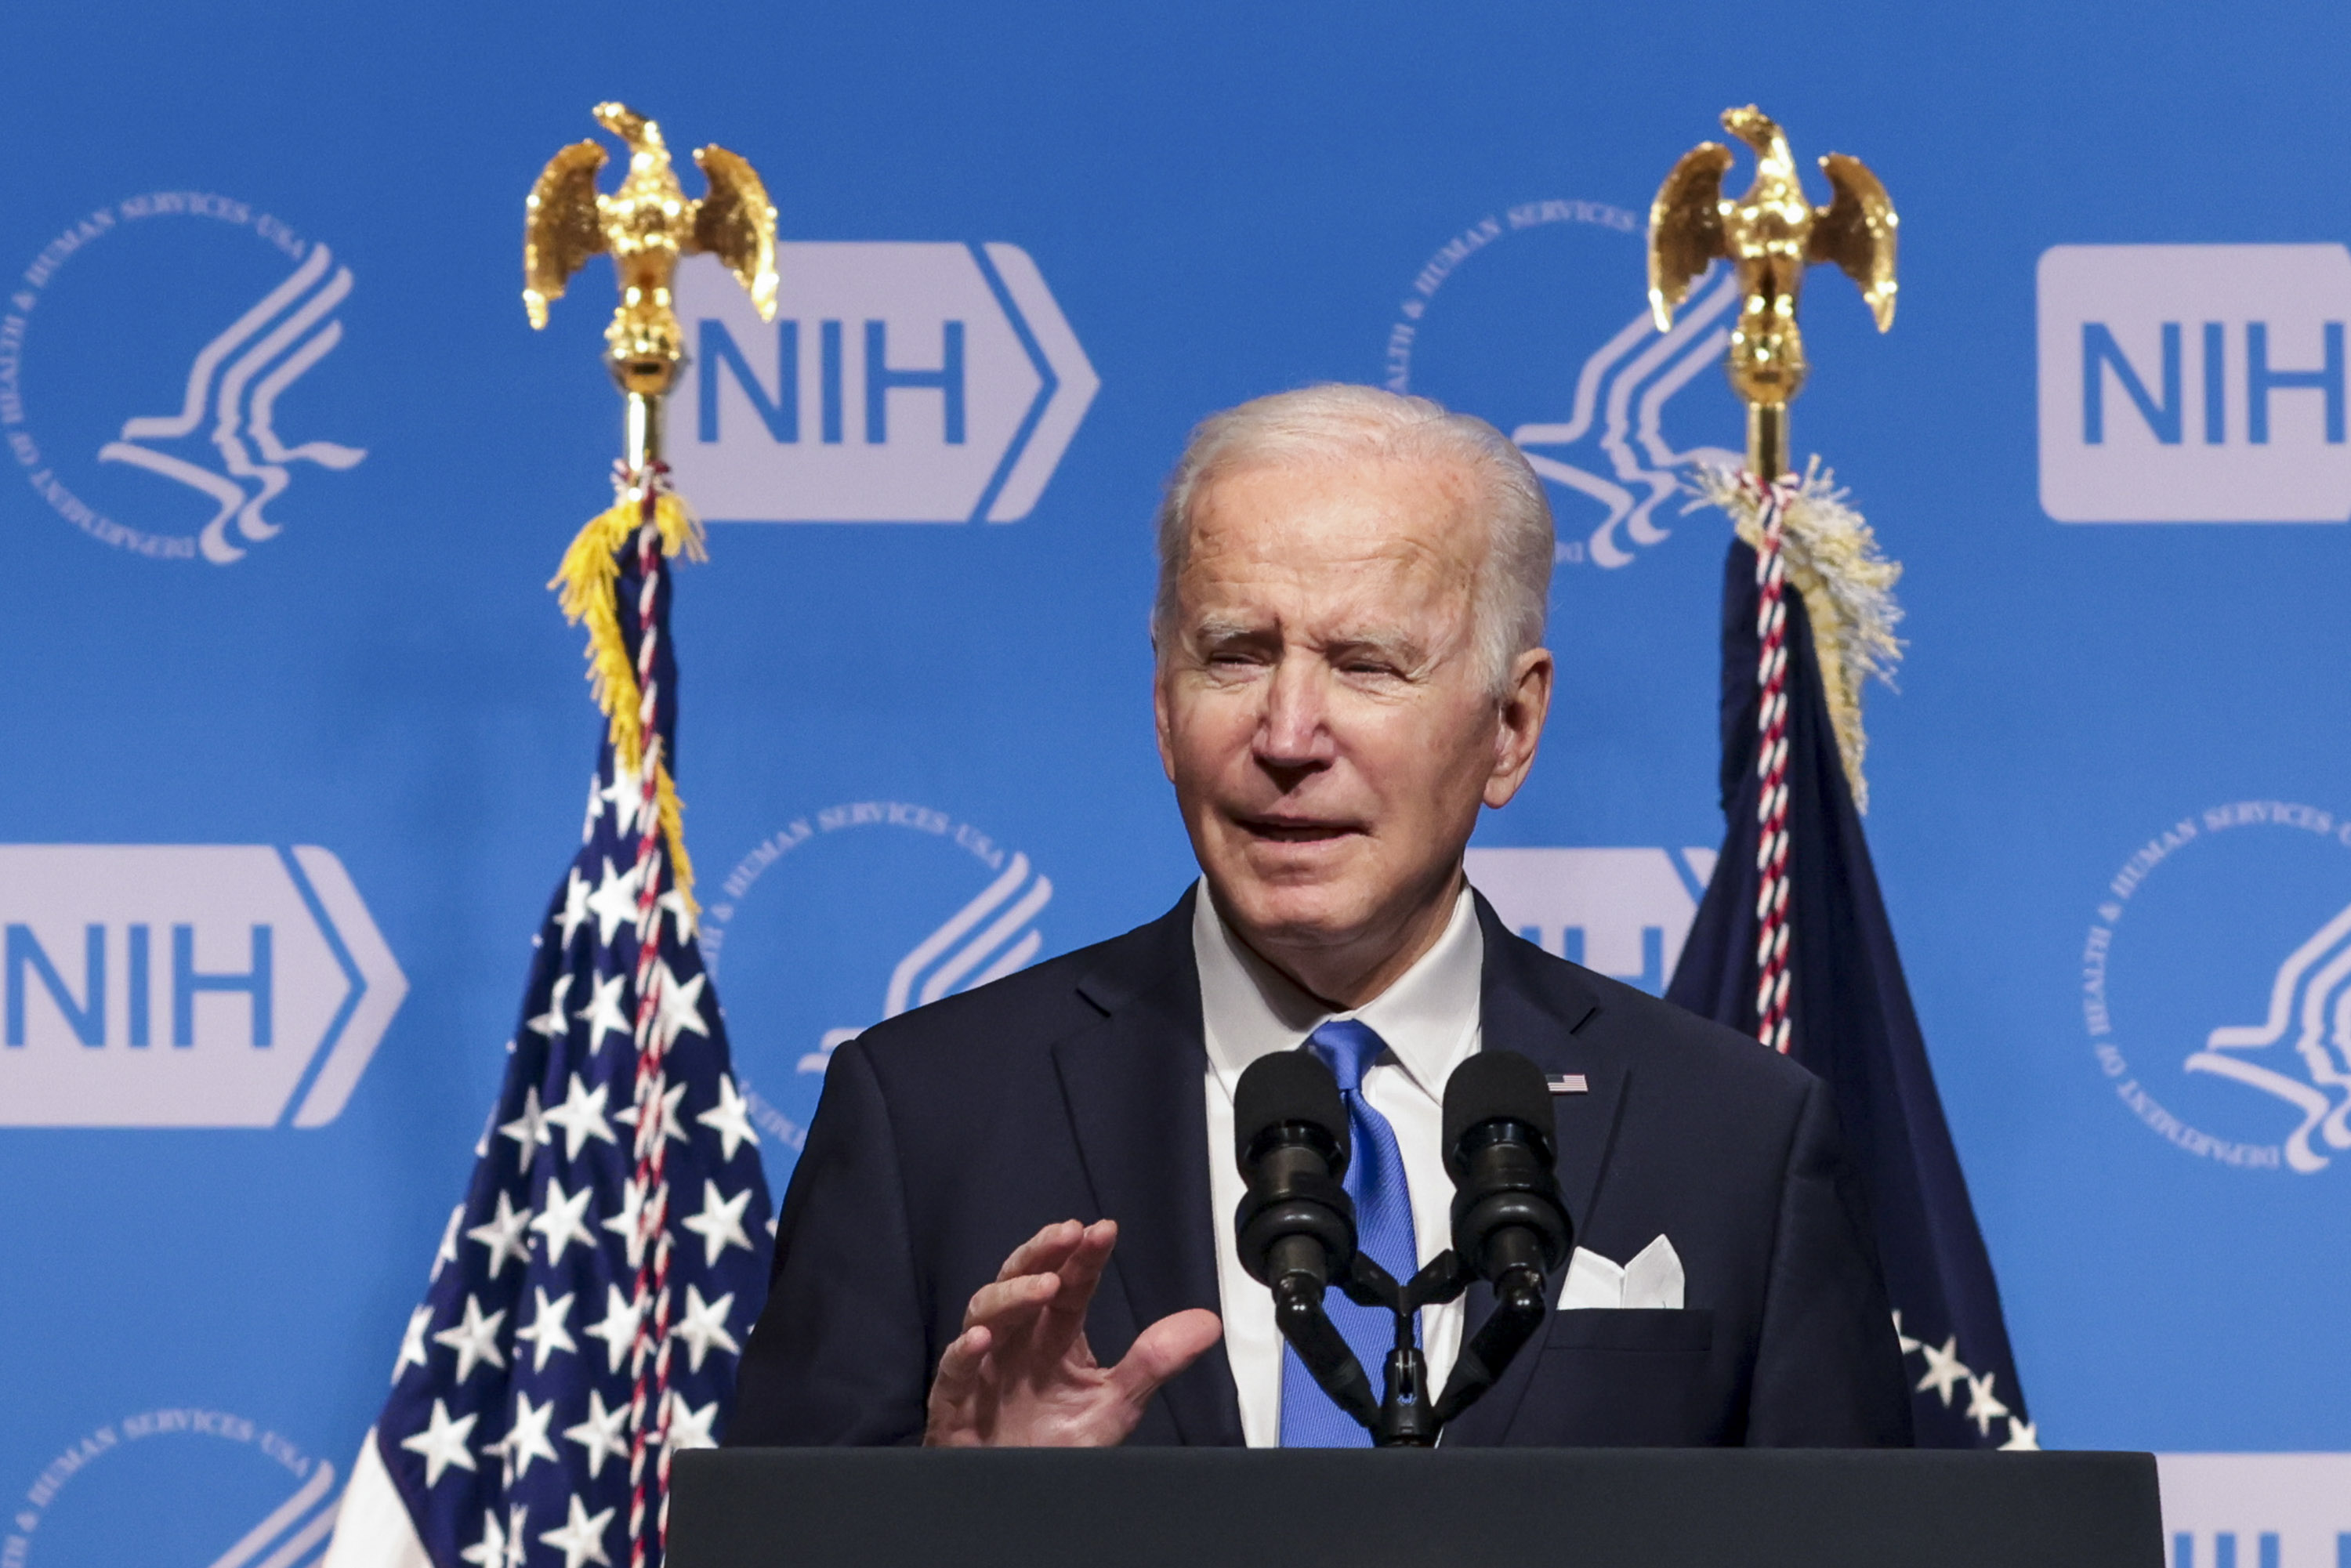 President Joe Biden speaks while visiting the National Institutes of Health in Bethesda, Maryland on Dec. 2. (Oliver Contreras—Bloomberg/Getty Images)